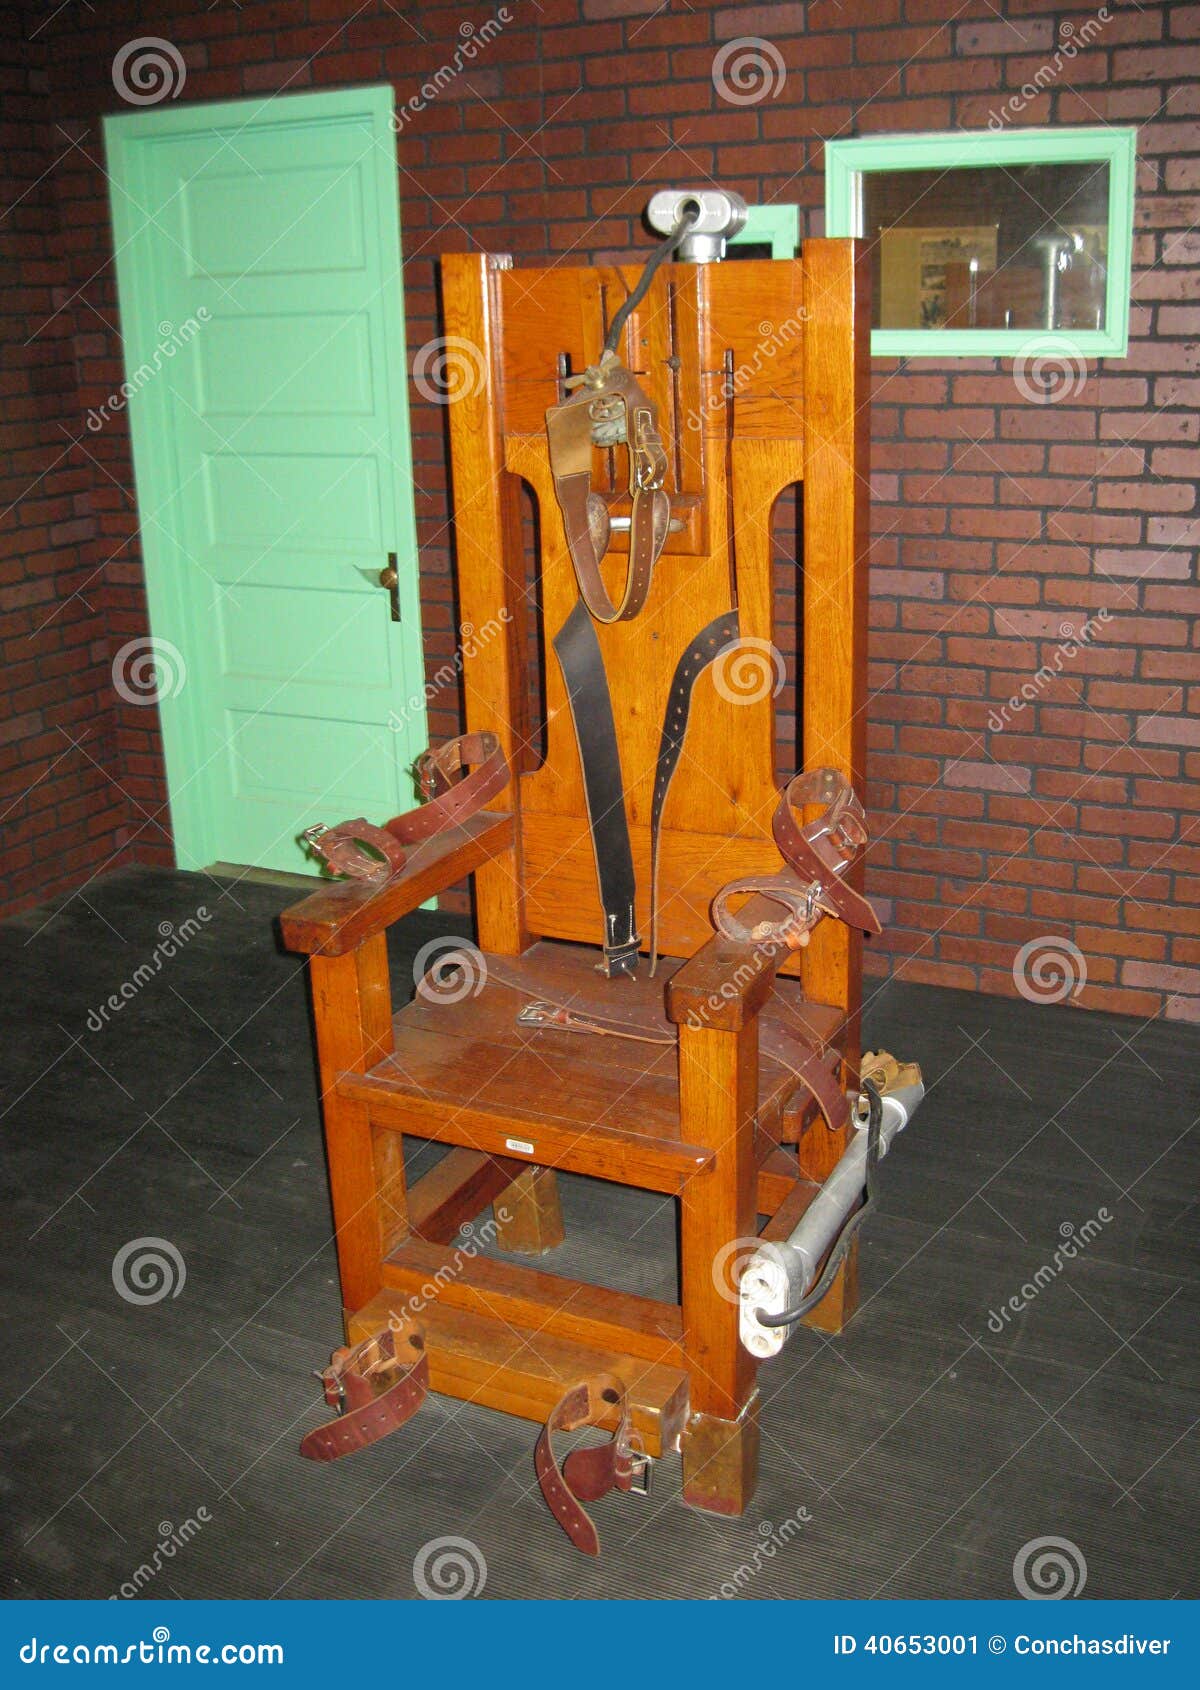 Old Sparky Stock Image Image Of Electric Chair Huntsville